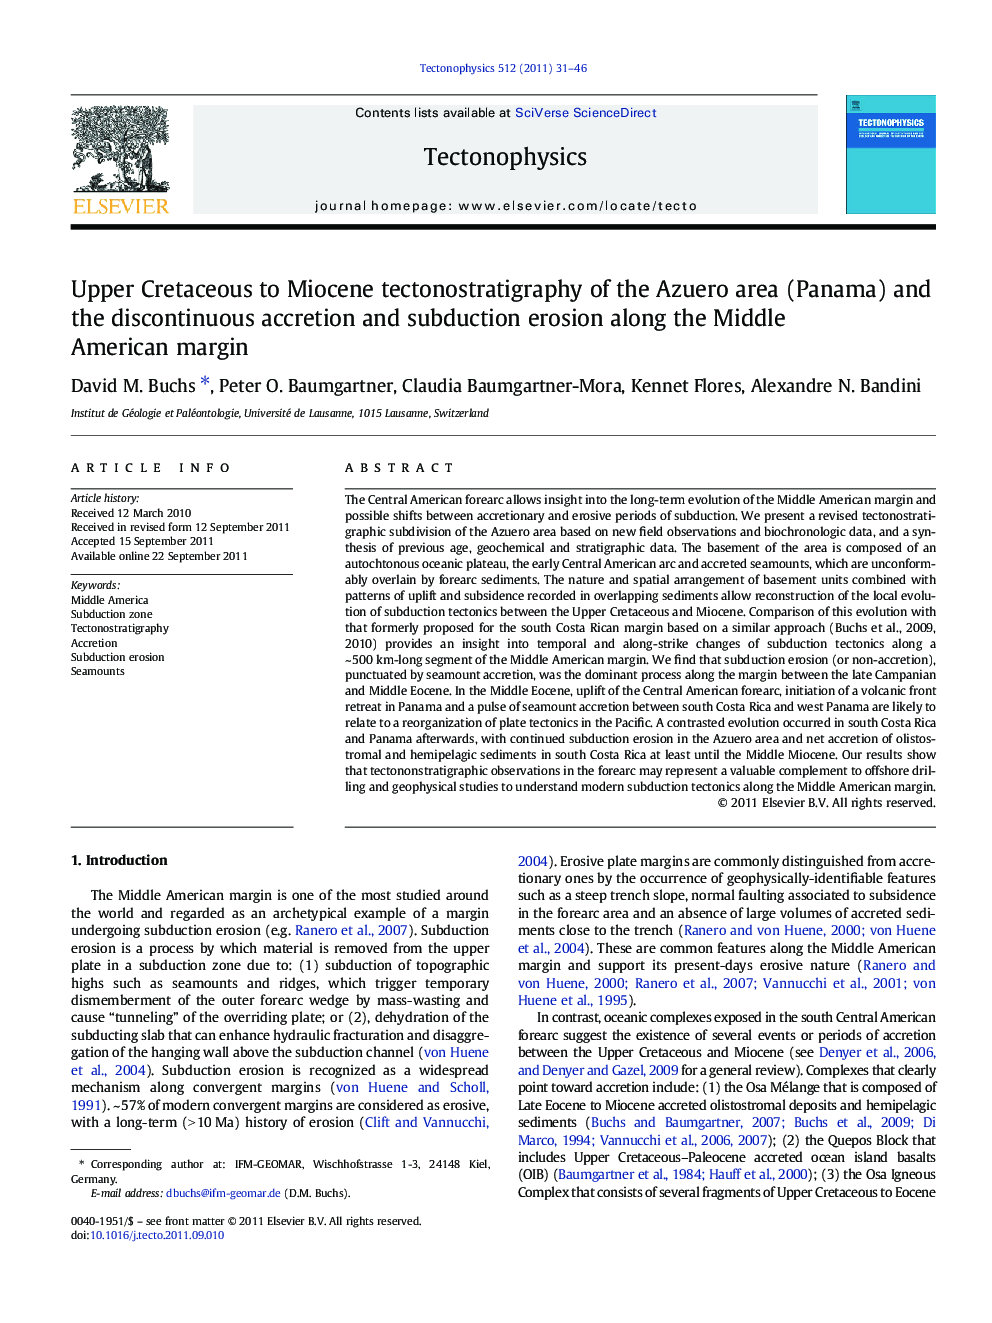 Upper Cretaceous to Miocene tectonostratigraphy of the Azuero area (Panama) and the discontinuous accretion and subduction erosion along the Middle American margin